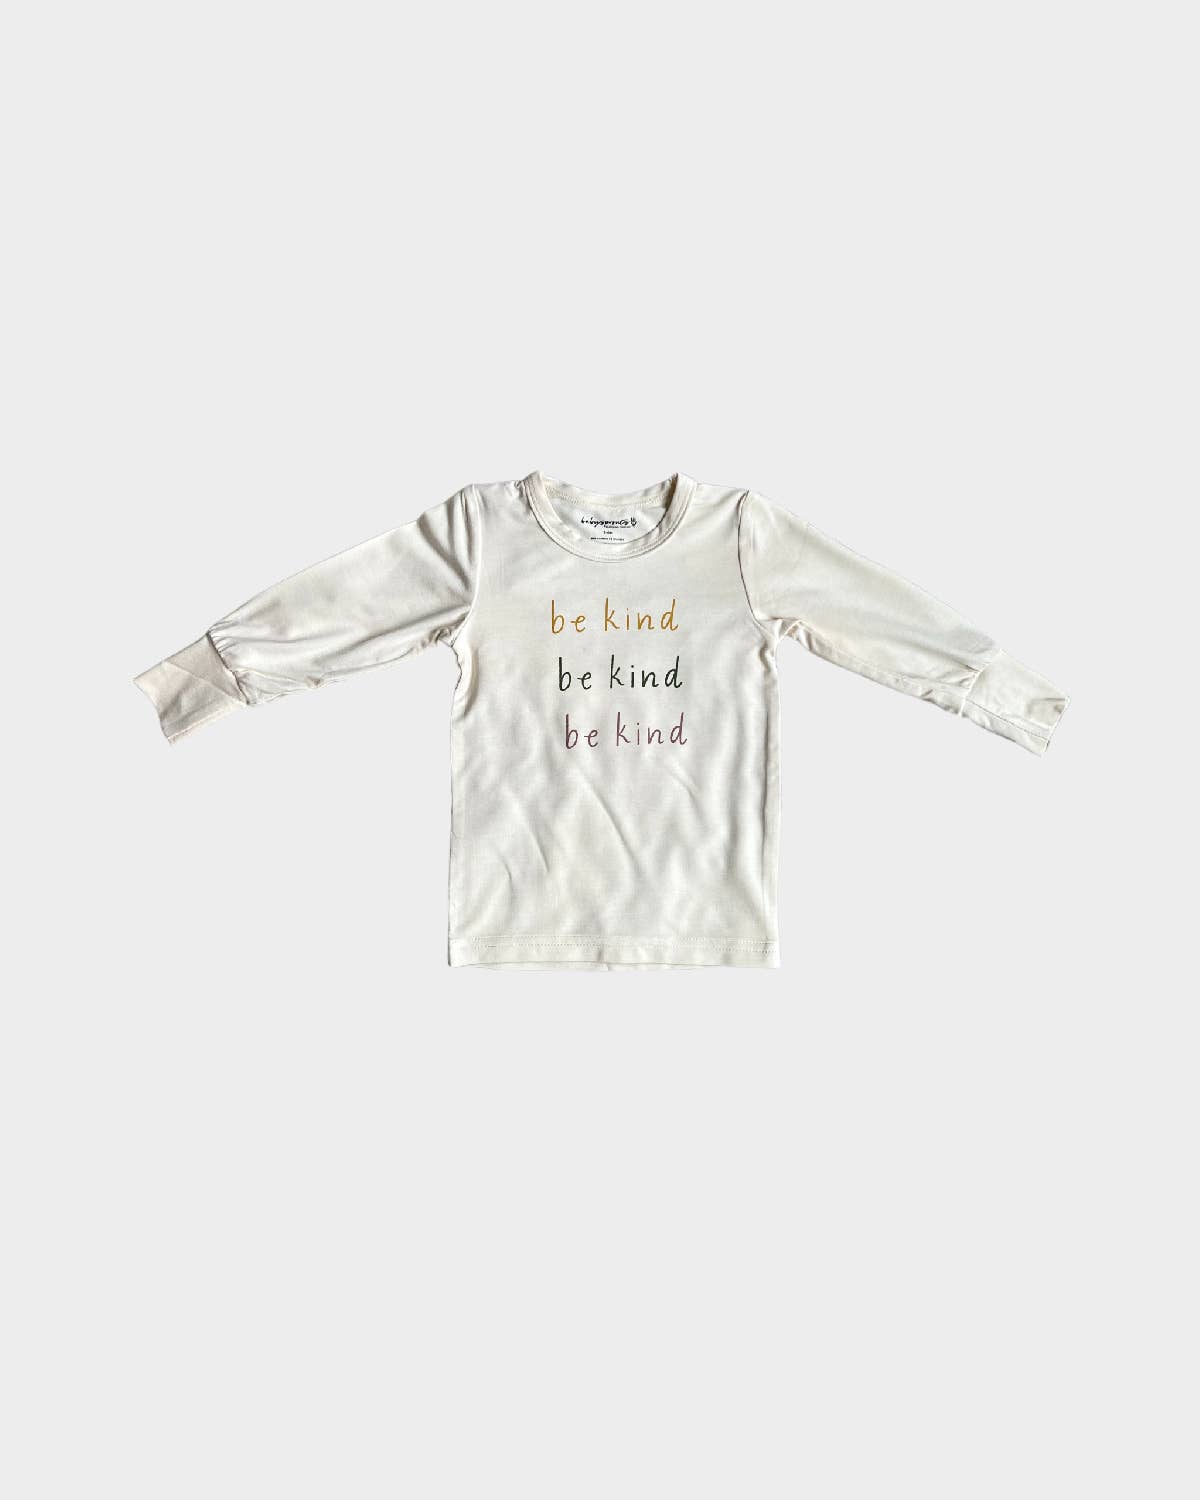 babysprouts clothing company - F23 D2: Kids Longsleeve Screen-Printed Tee in Be Kind